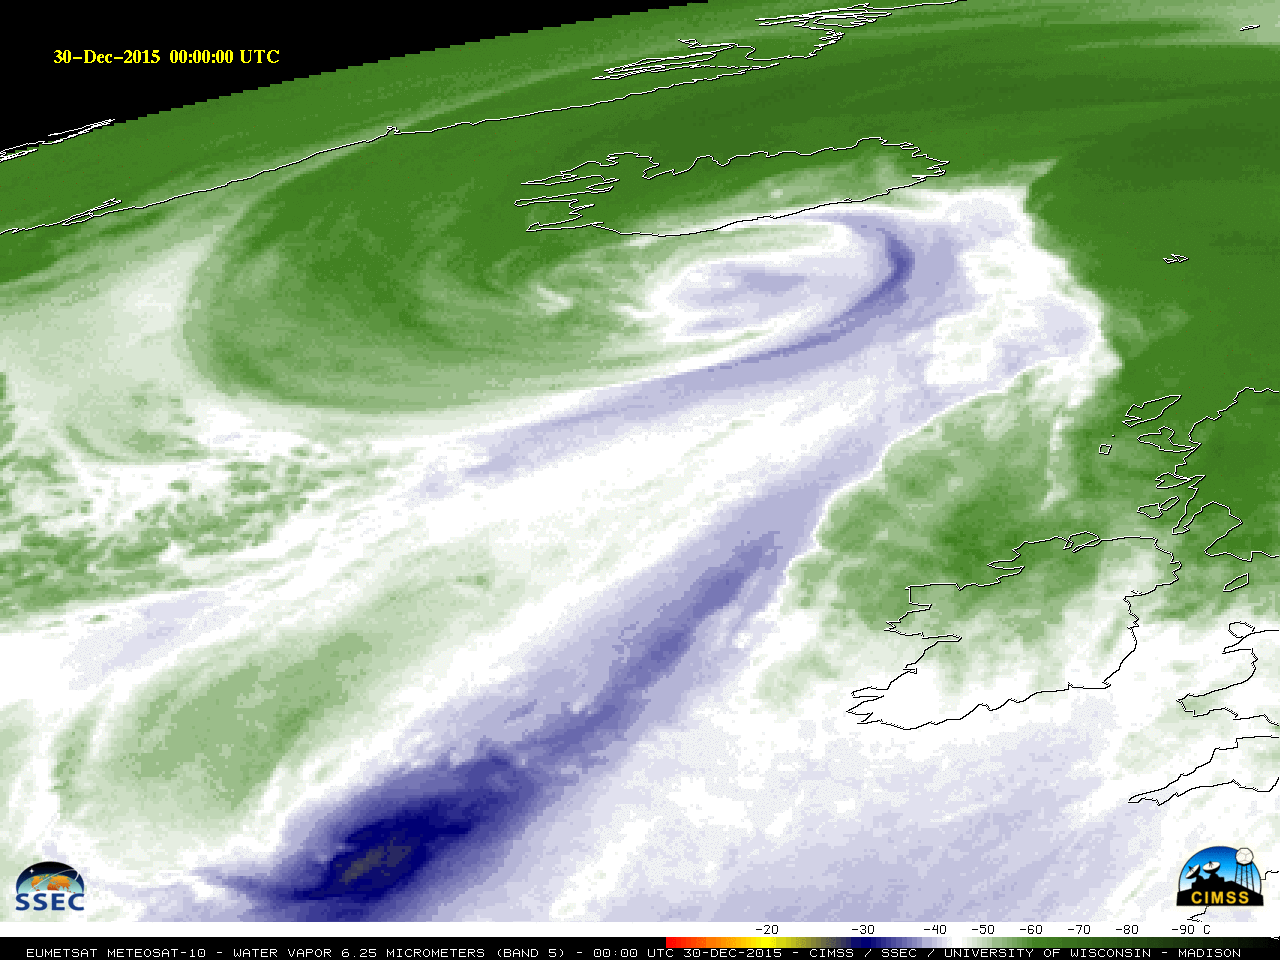 Meteosat-10 Water Vapor (6.25 µm) images [click to play MP4 animation]